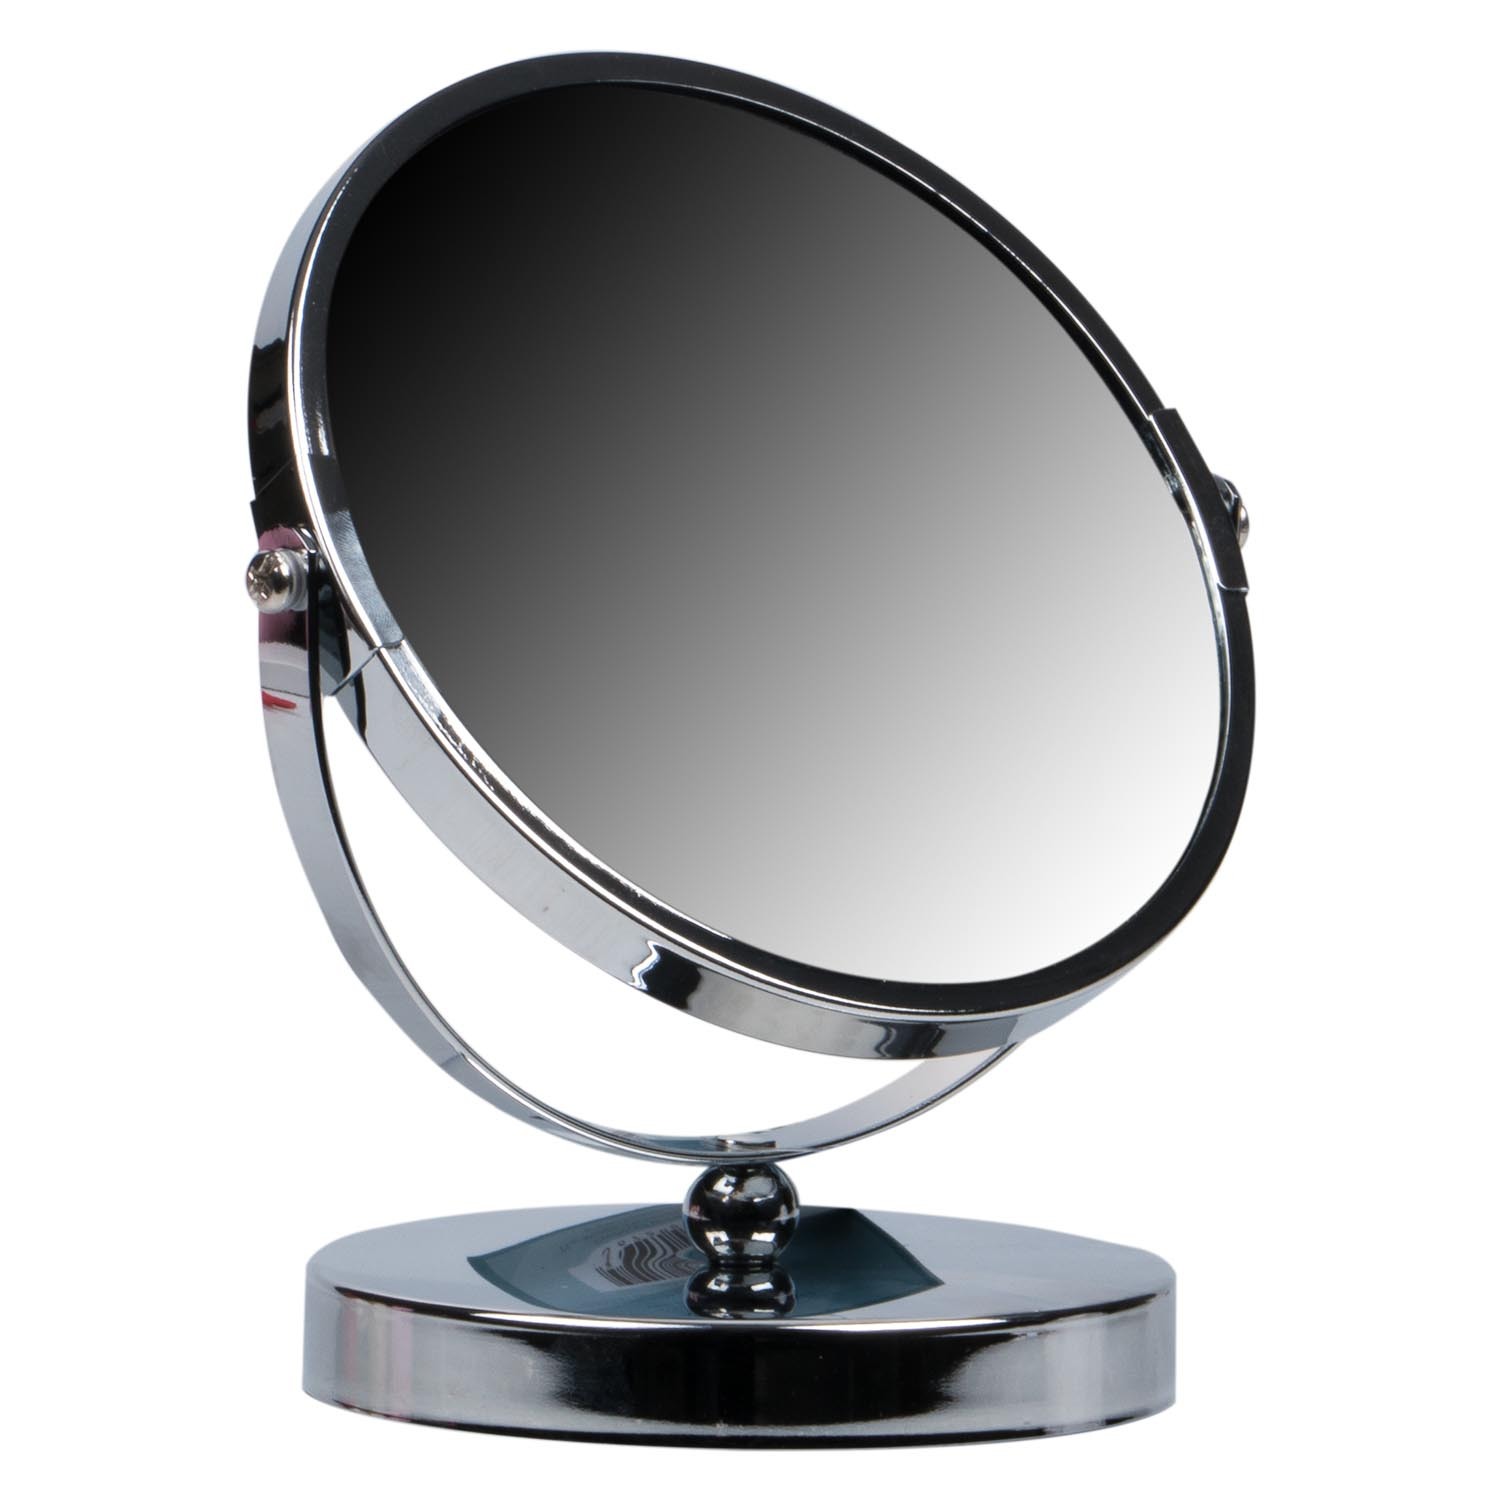 Rotating Magnifying Cosmetic Mirror 19.5 x 16.5cm Image